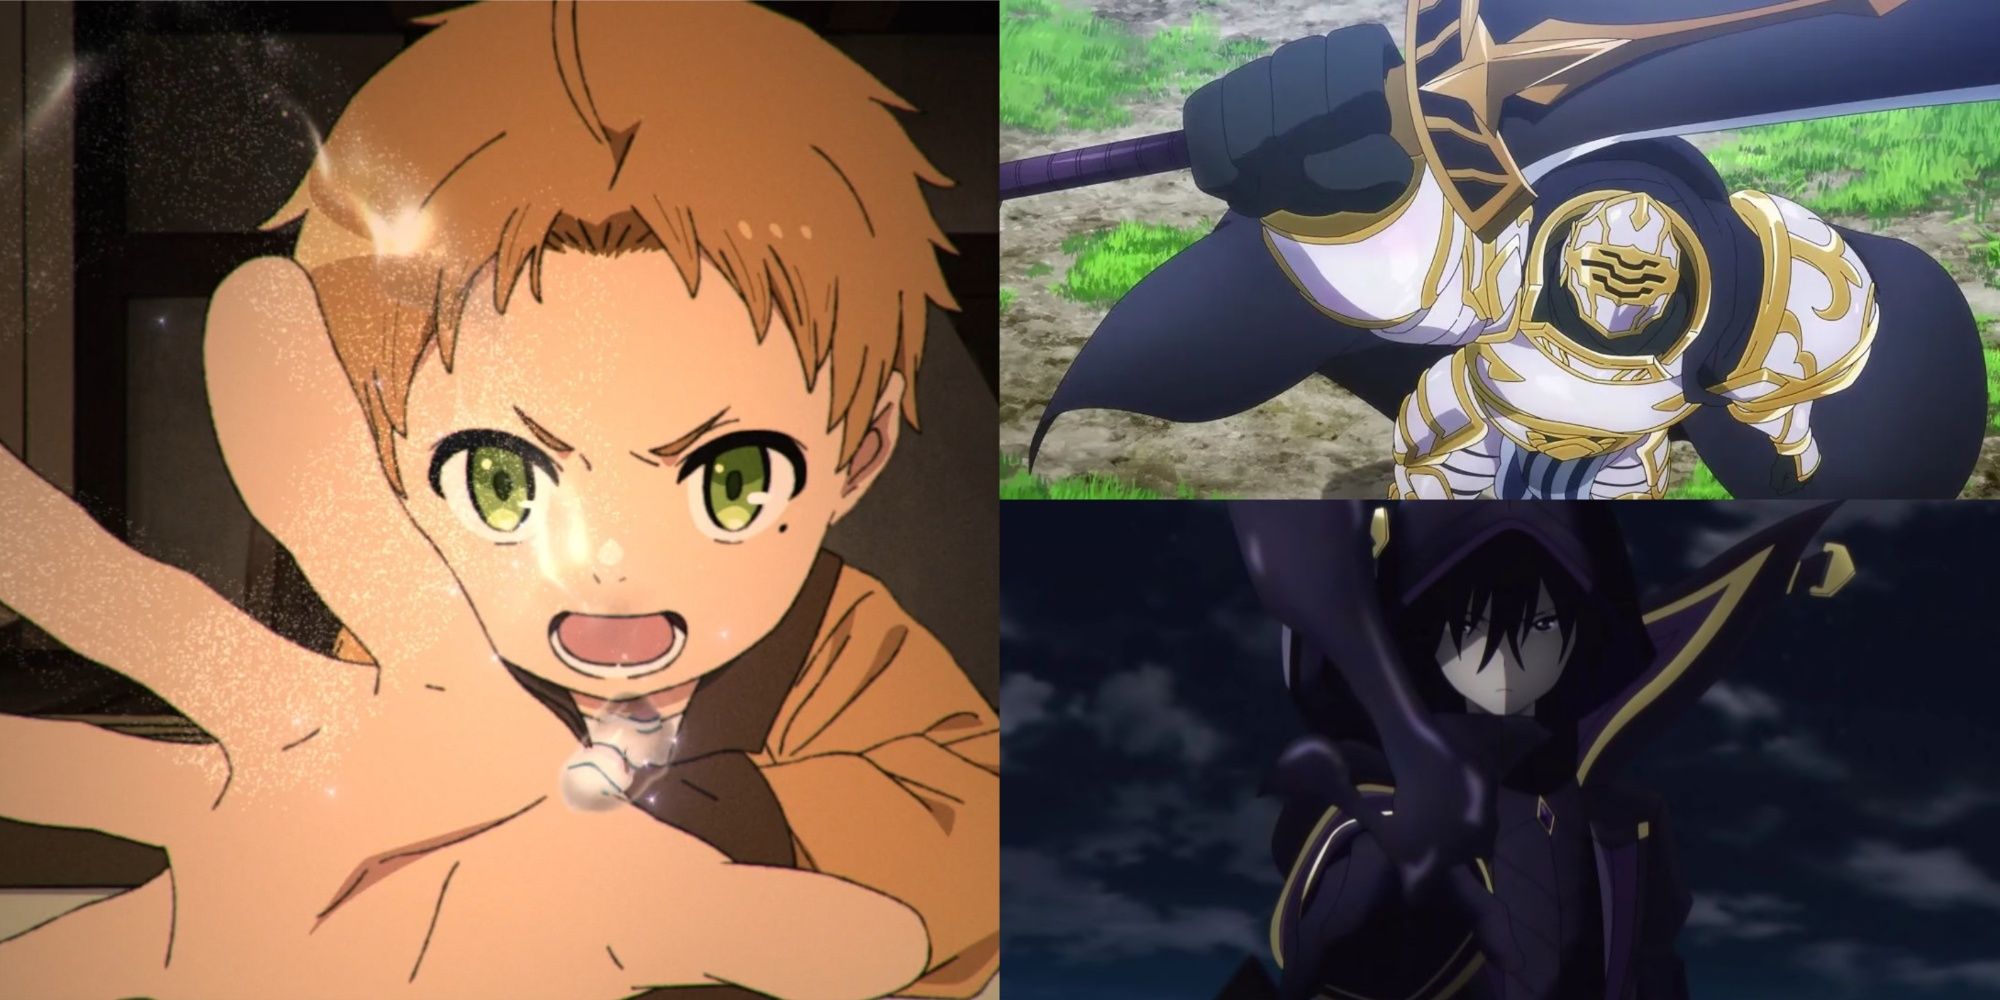 10 Isekai Anime & Manga Where the Protagonist is Overpowered but Conceals It